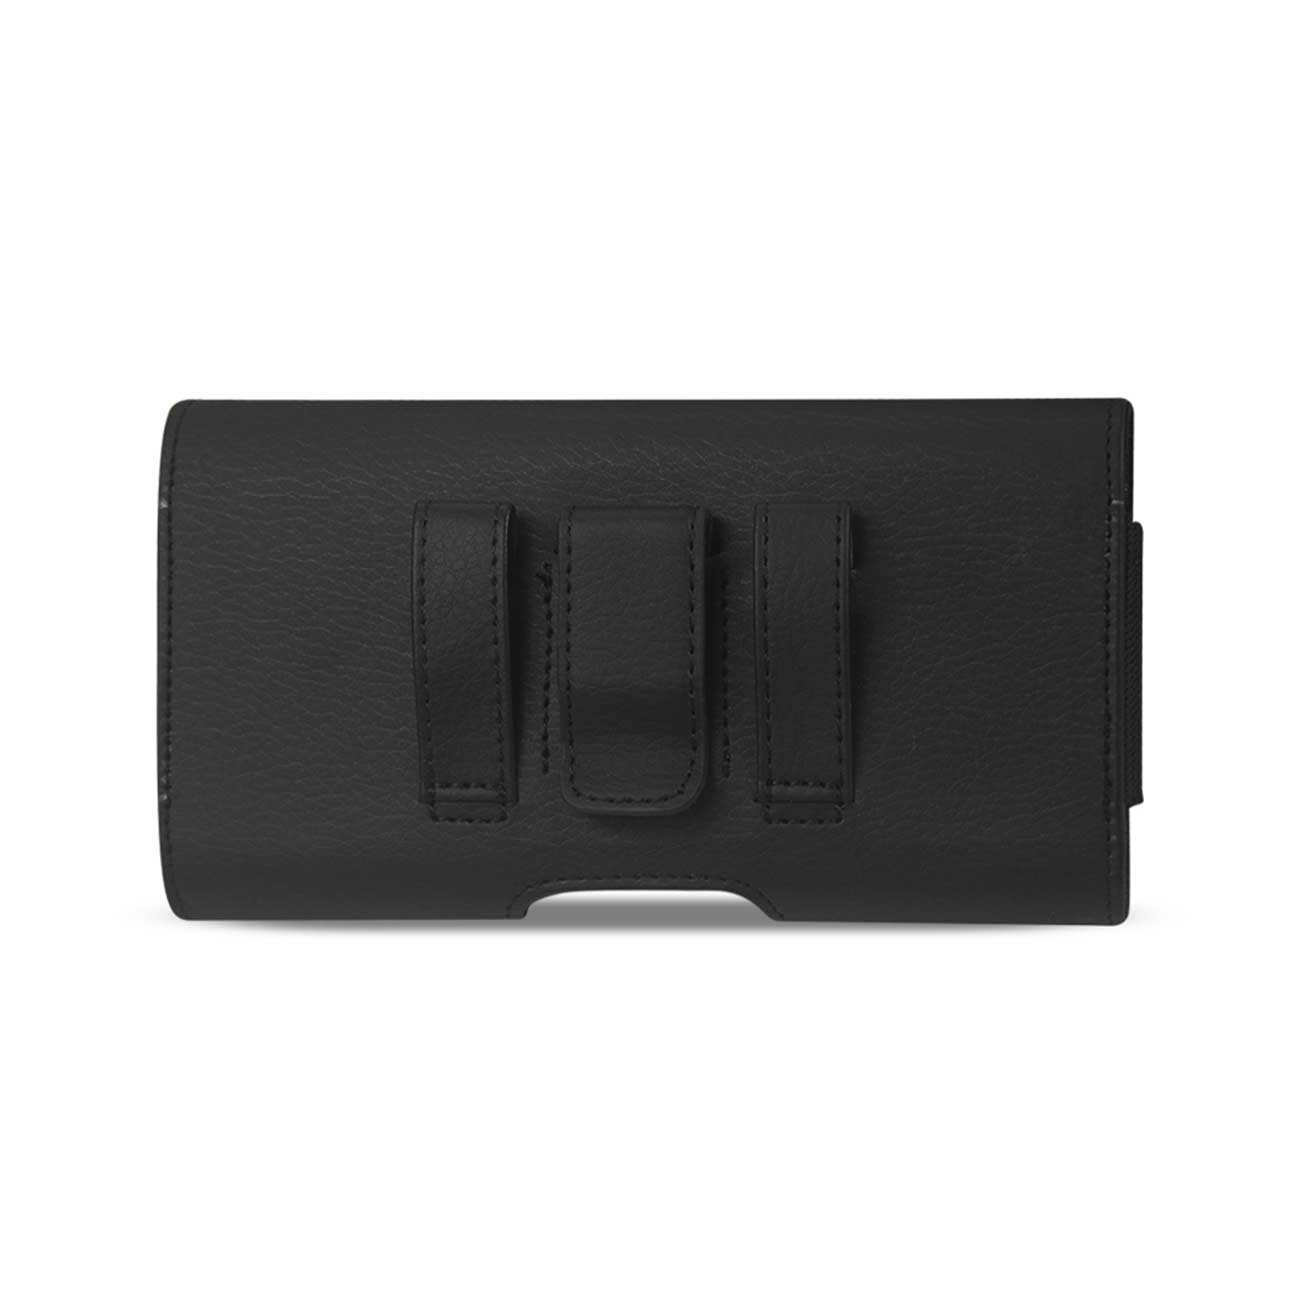 Mobile Vogue by Reiko Premium Eco-Friendly Leather Phone Pouch Belt Clip Holster Compatible with iPhone/Galaxy/Stylo/Android Phone with Protective Case on (Black-MV500, 6.1 x 3.2 x 0.7 in)